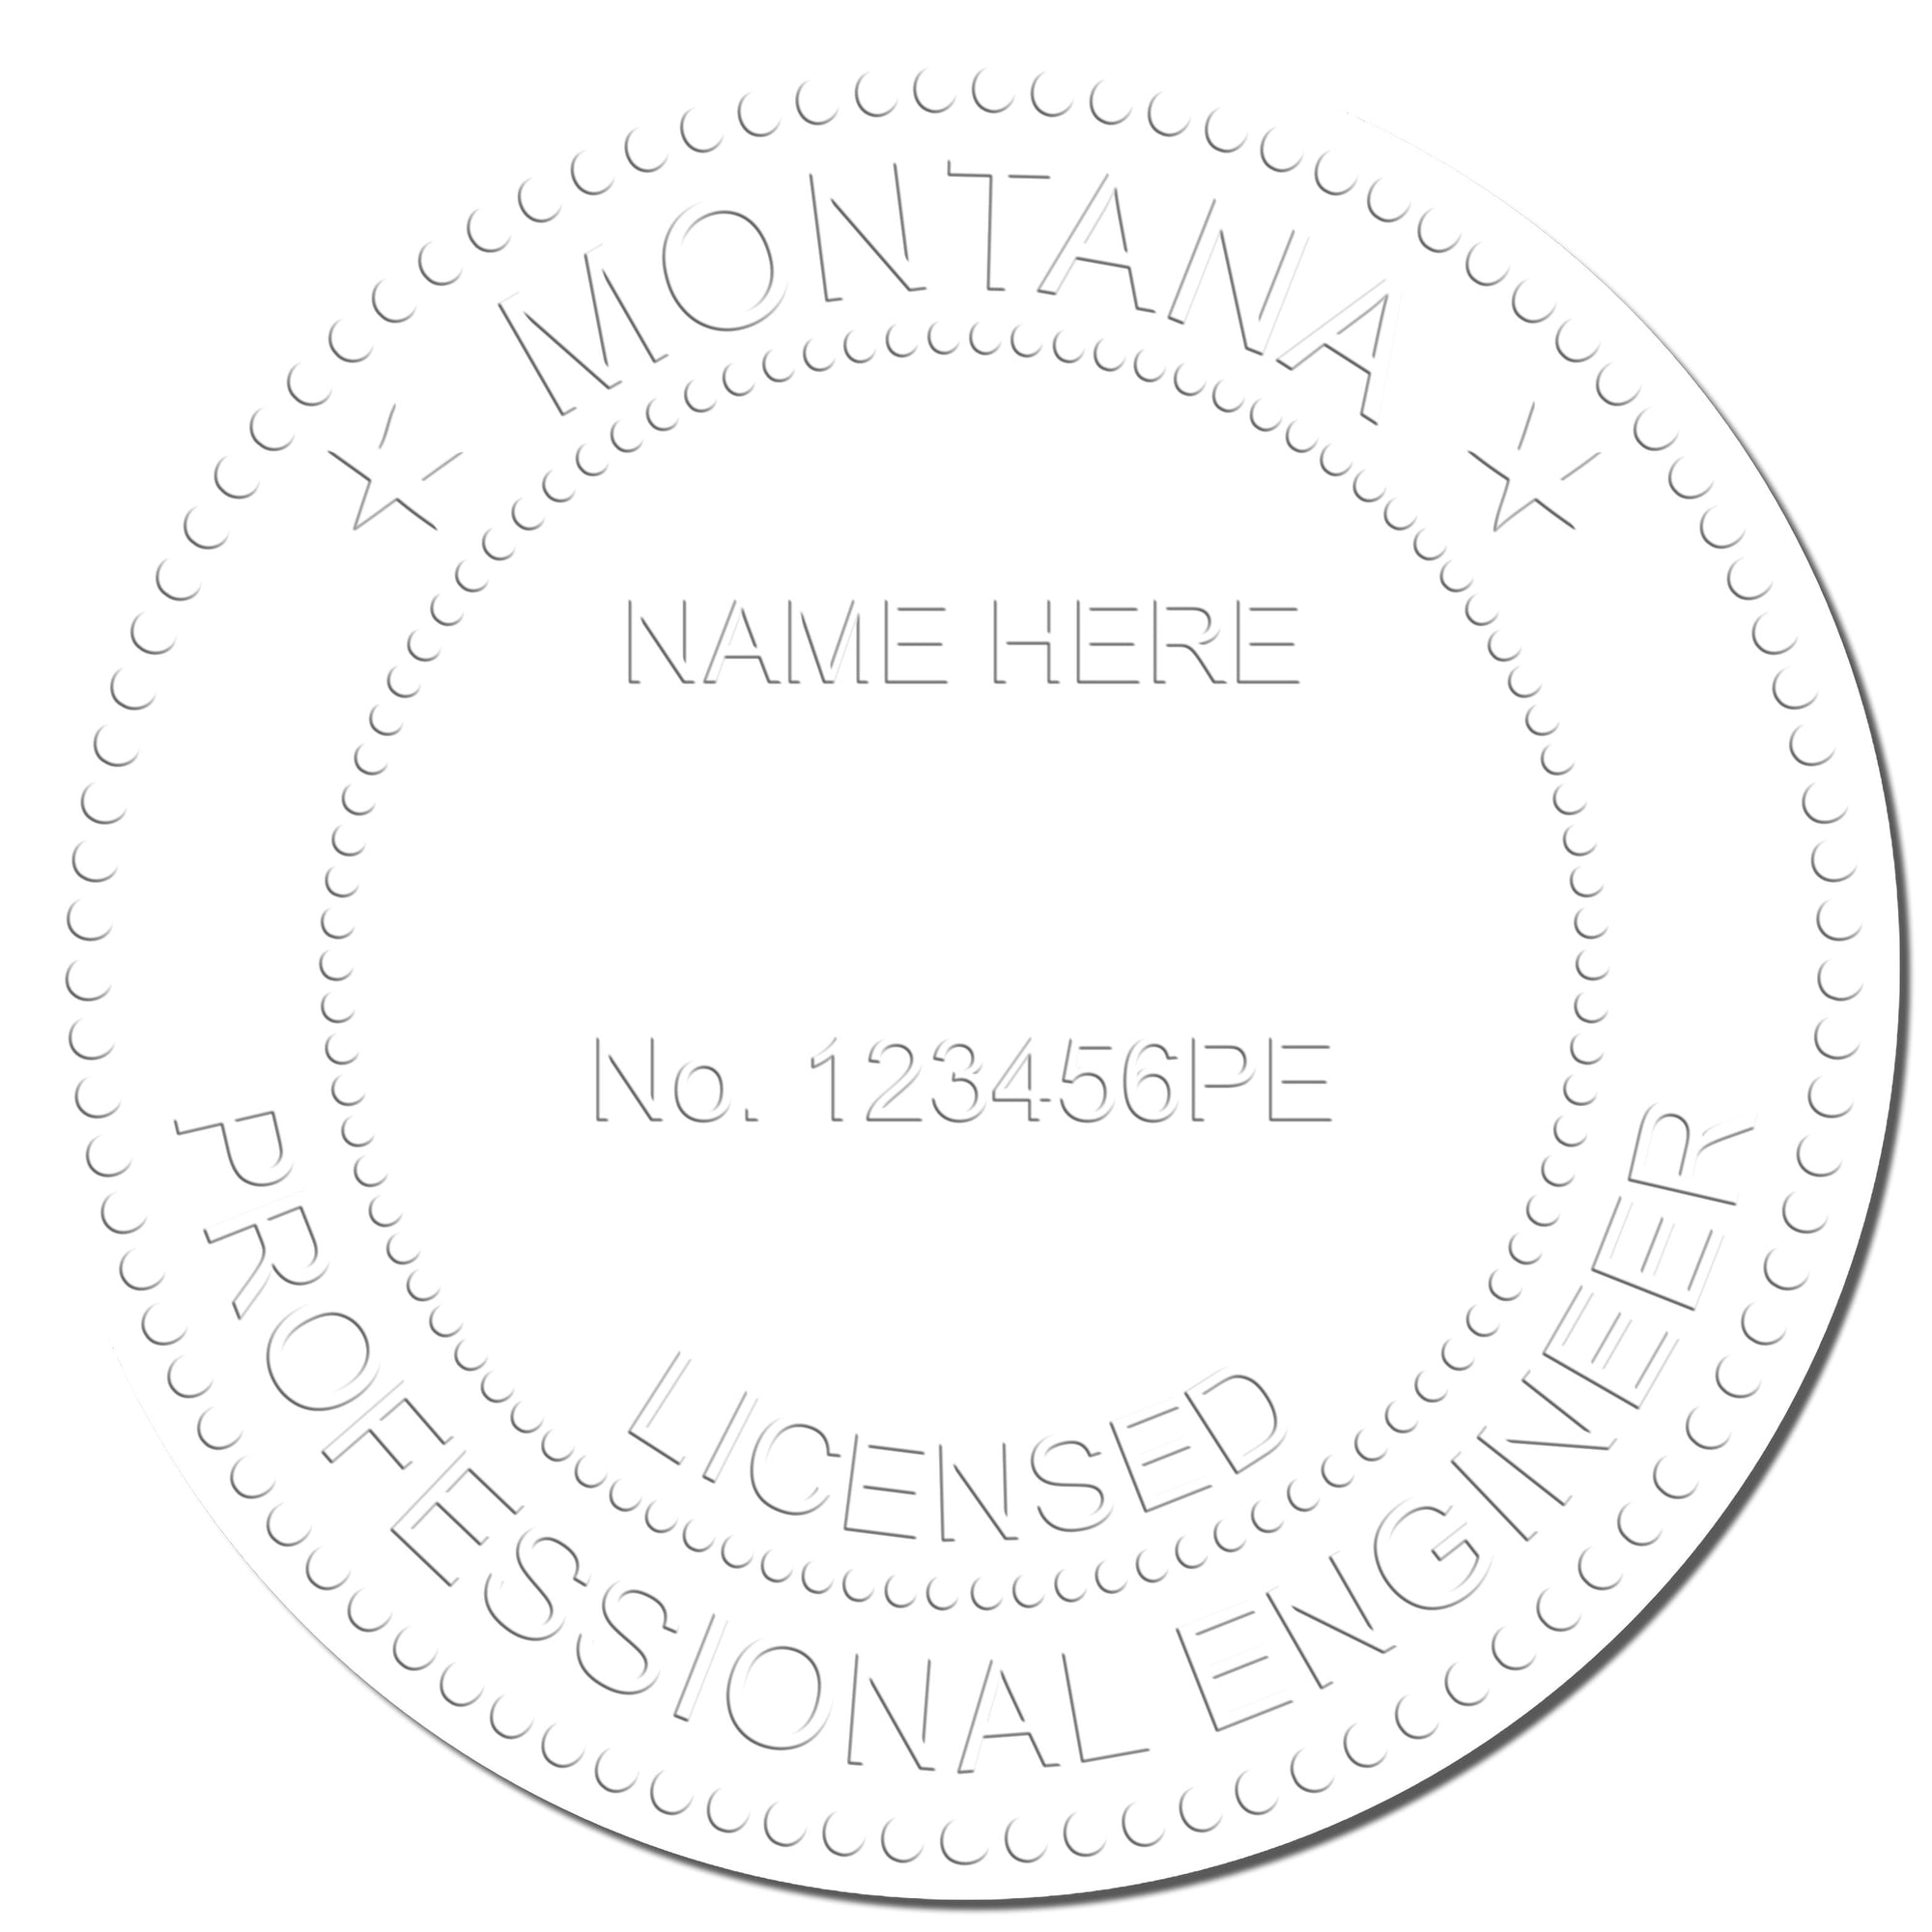 The main image for the Montana Engineer Desk Seal depicting a sample of the imprint and electronic files